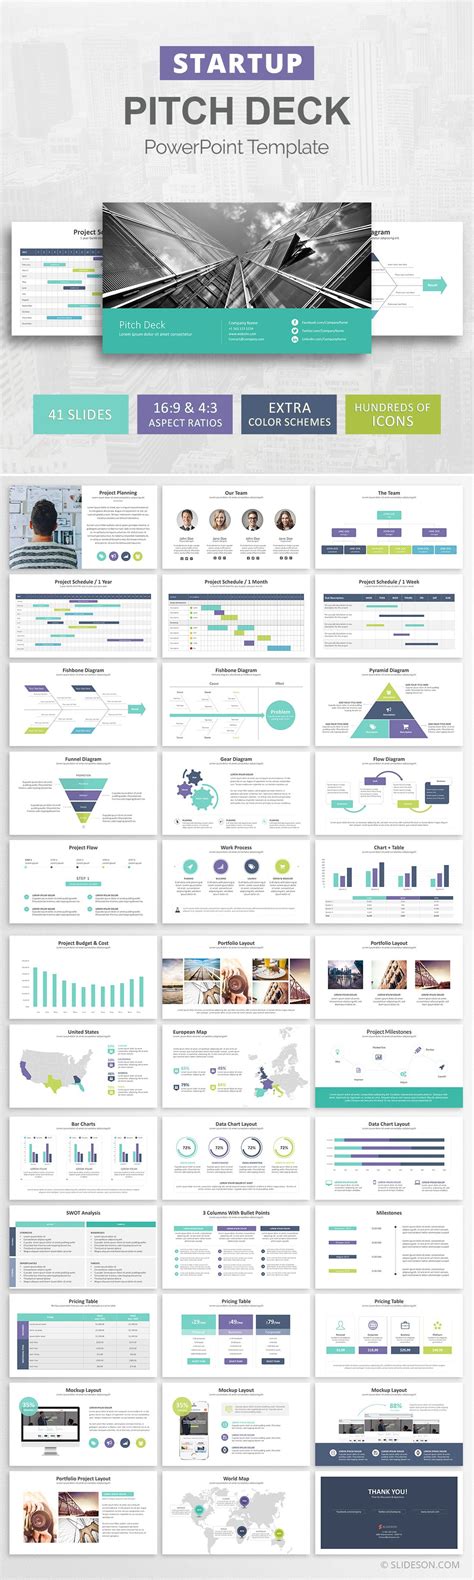 Startup Pitch Deck Powerpoint Template Powerpoint Tips Professional